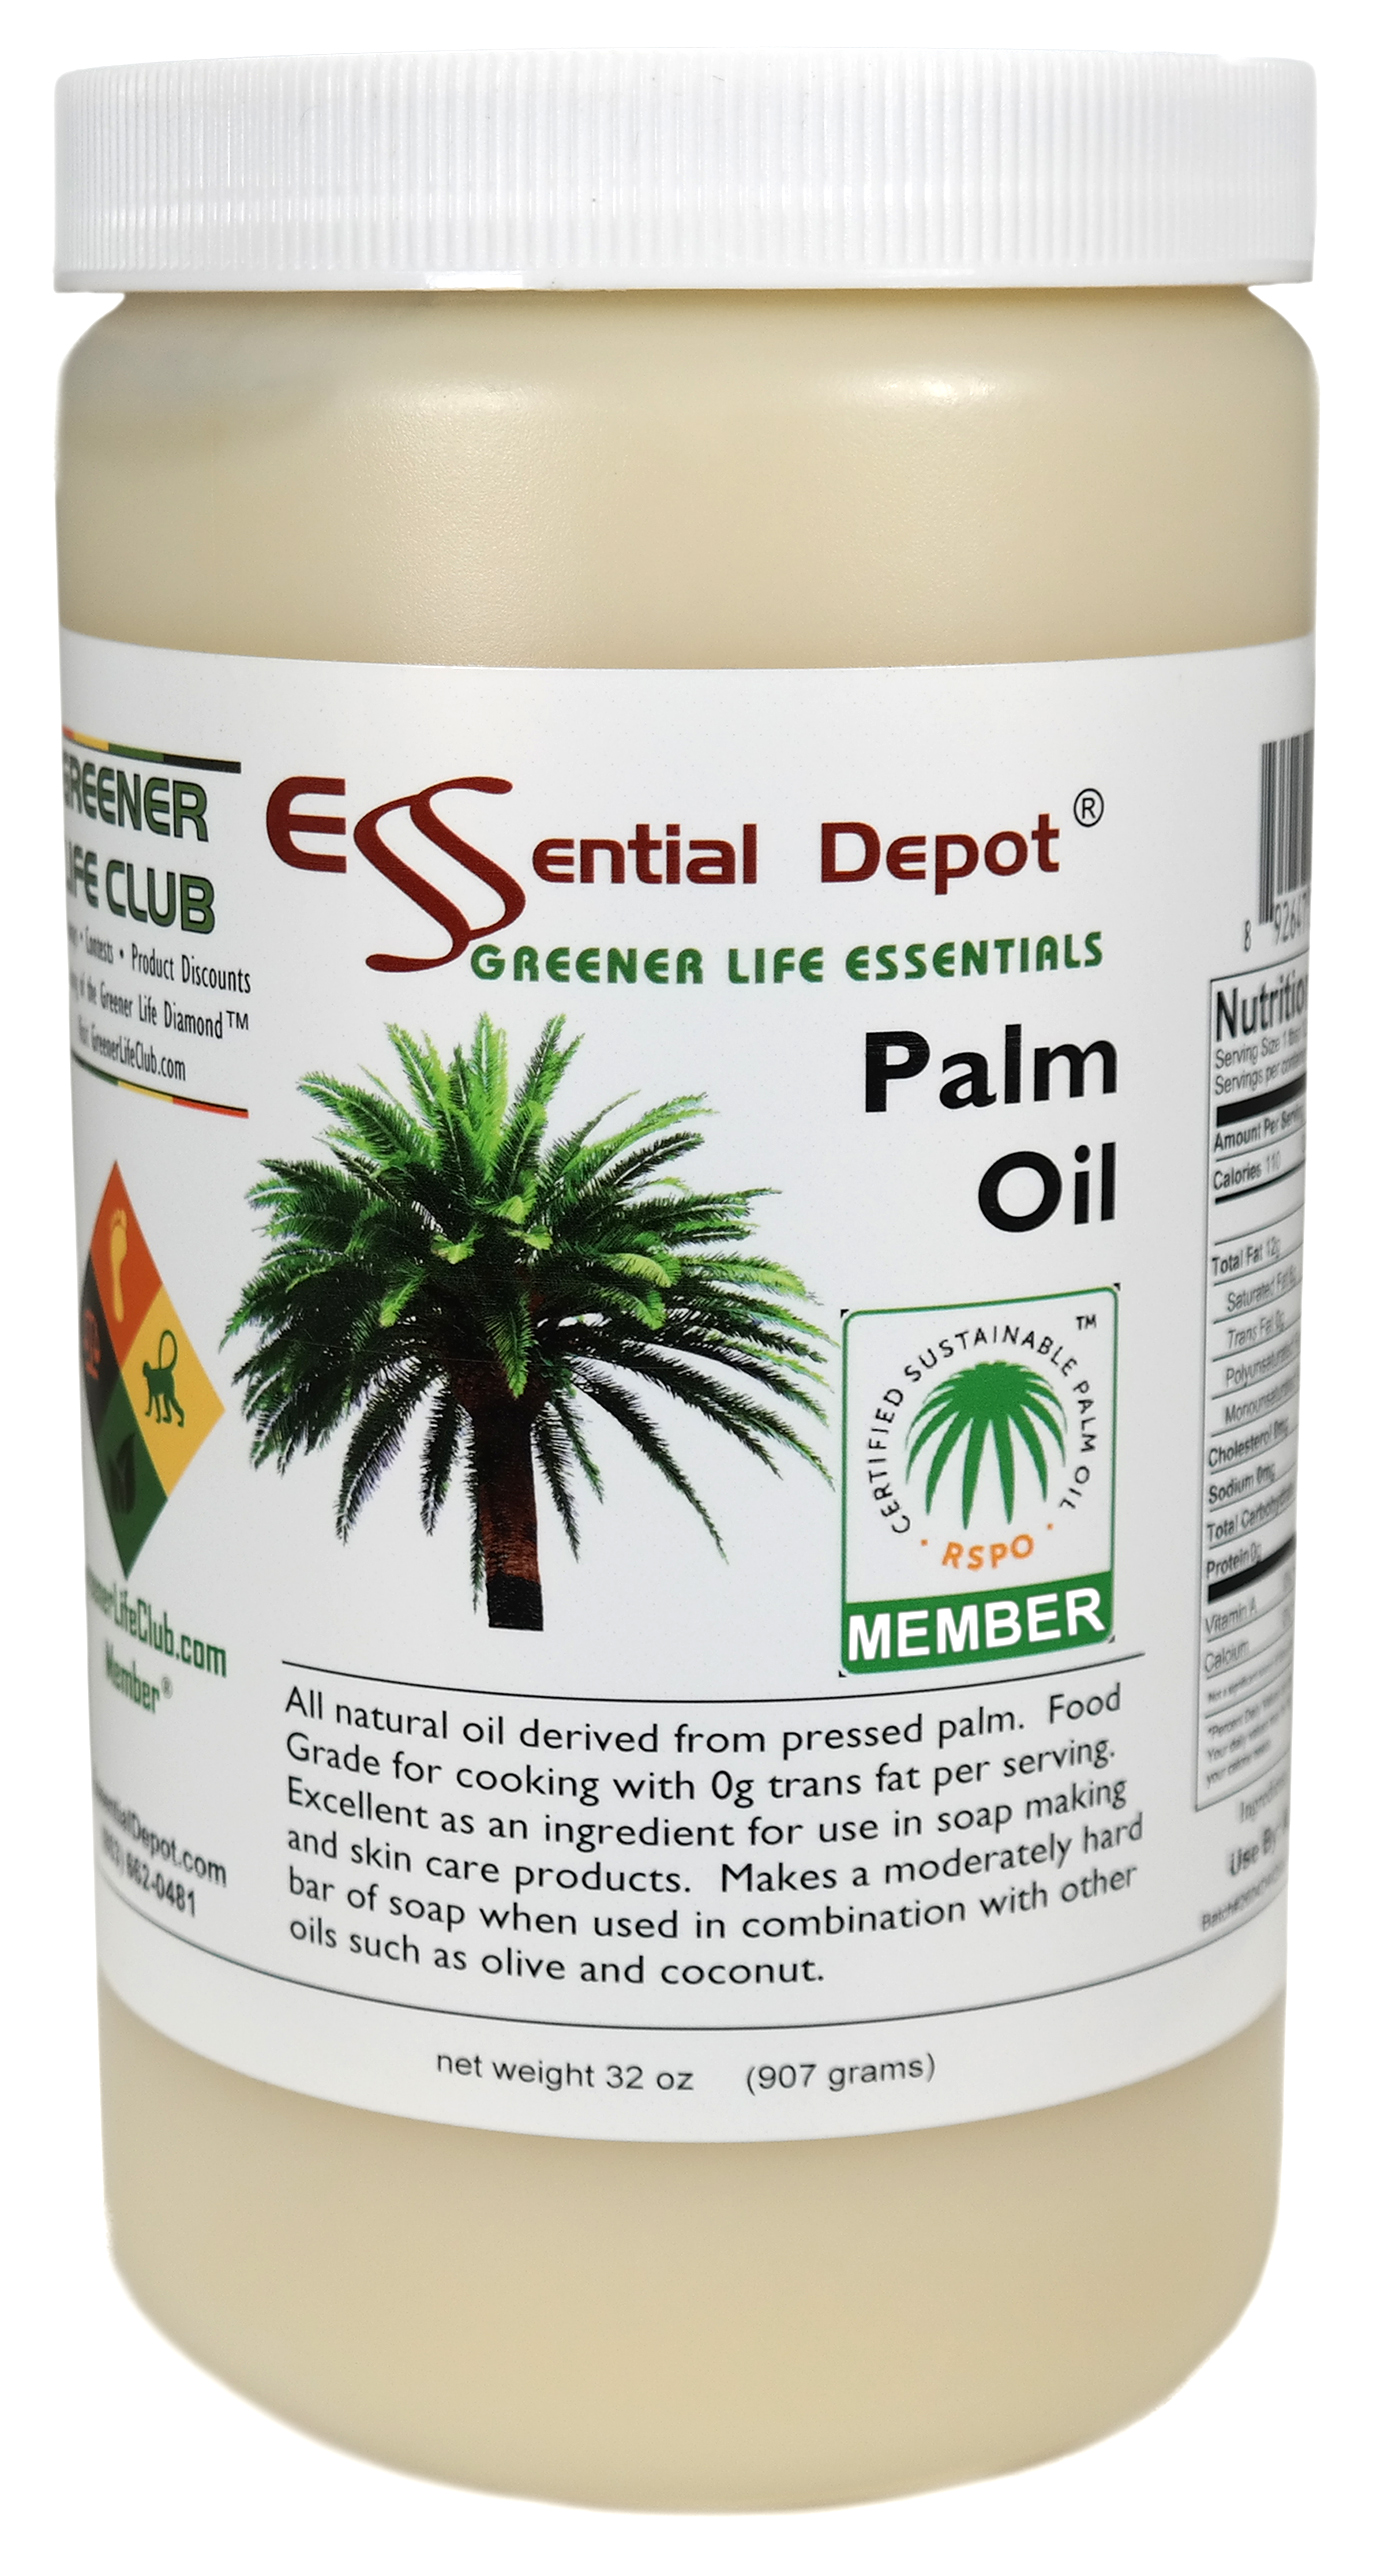 Palm Oil - RSPO Sustainable - 1 Quart - USP Food Grade- Not Hydrogenated -  0g Trans Fat Alternative: Essential Depot